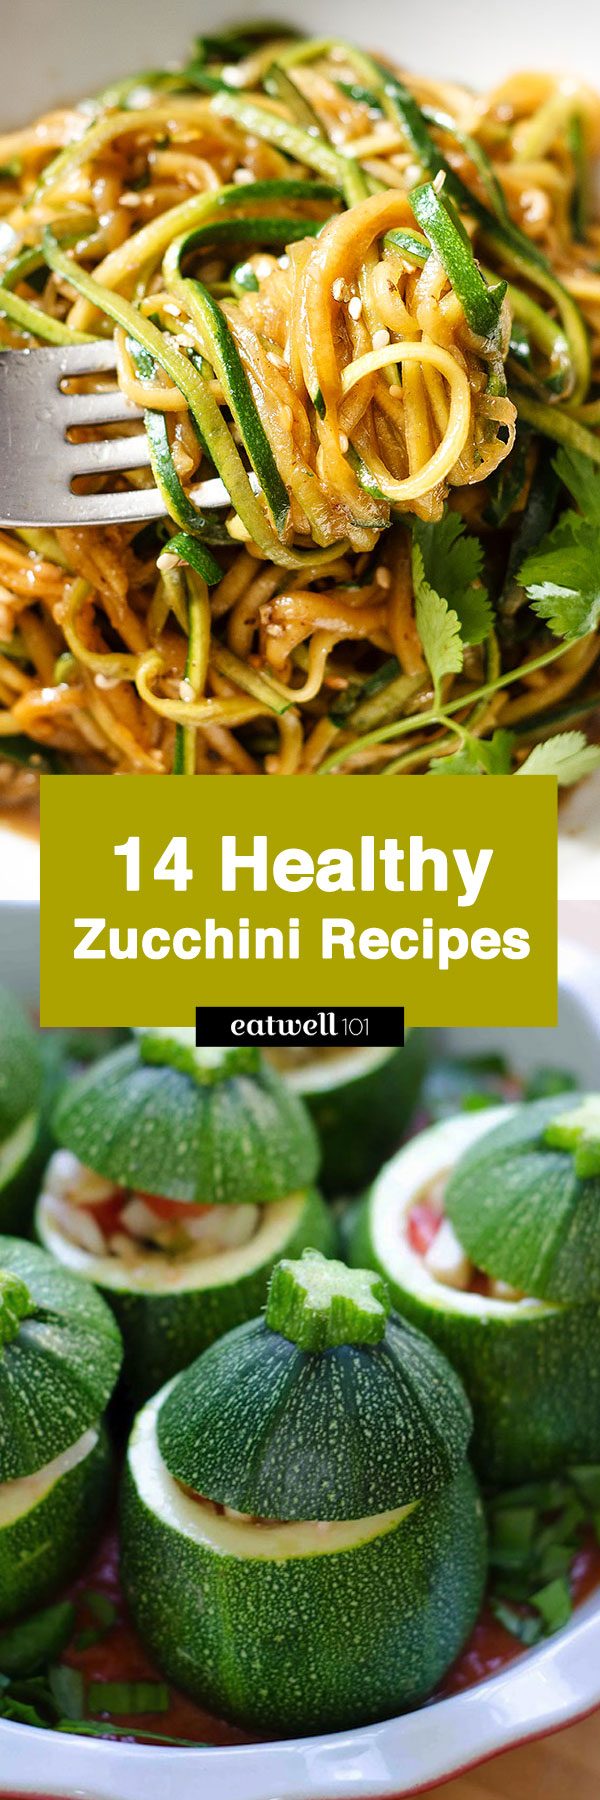 Zucchini Recipes: 14 Easy Healthy Zucchini Recipes for Lunch or Dinner - #zucchini #recipes #eatwell101 - These zucchini recipes are full of nutrients and flavor!